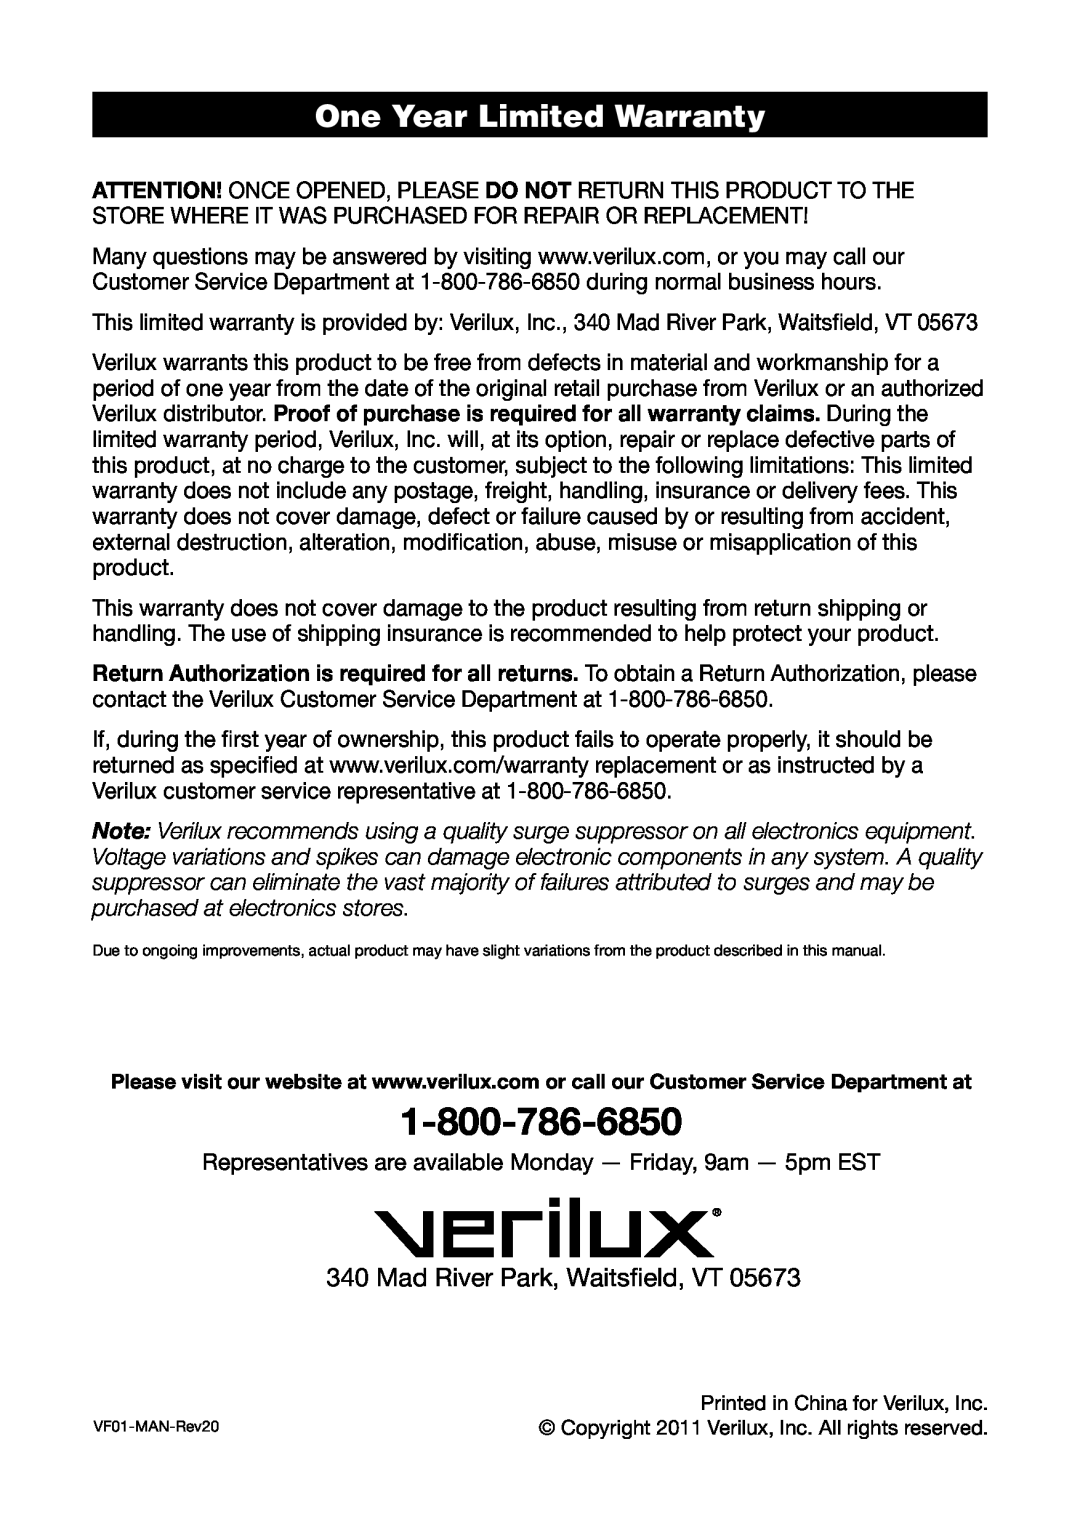 Verilux VF01 manual One Year Limited Warranty, Mad River Park, Waitsfield, VT 